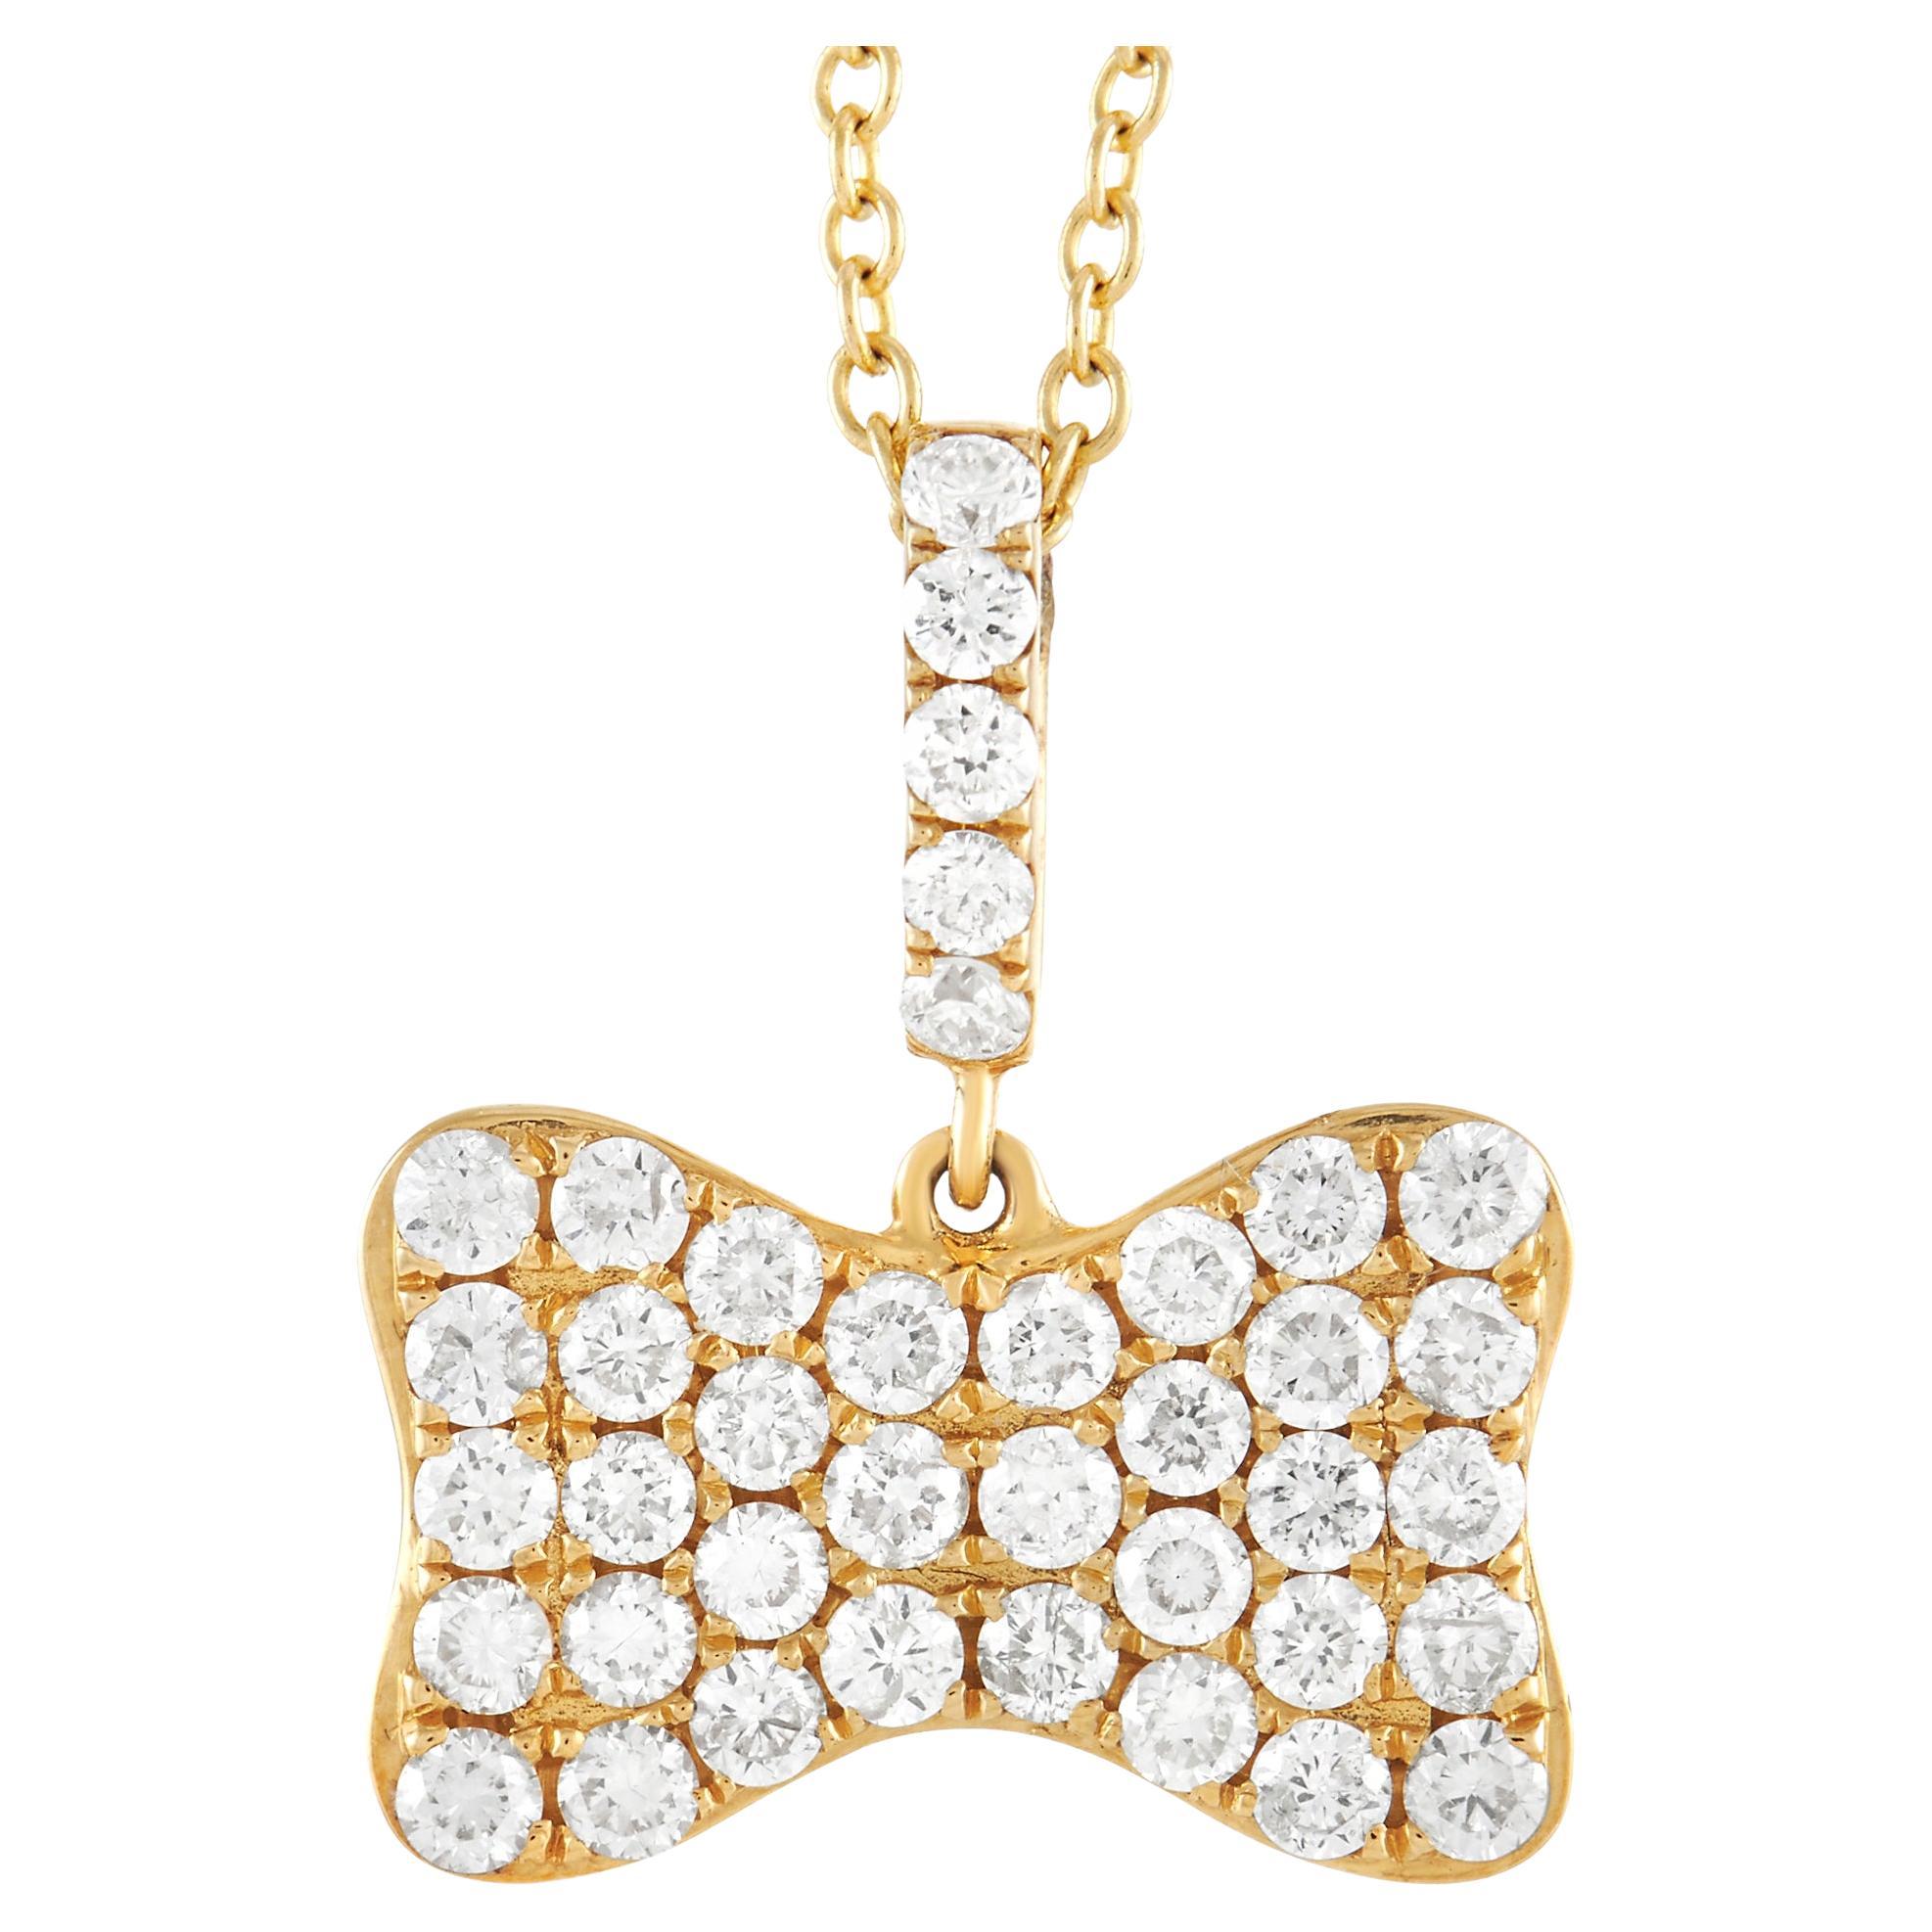 LB Exclusive 18K Yellow Gold 0.80 ct Pave Diamond Bow Pendant Necklace